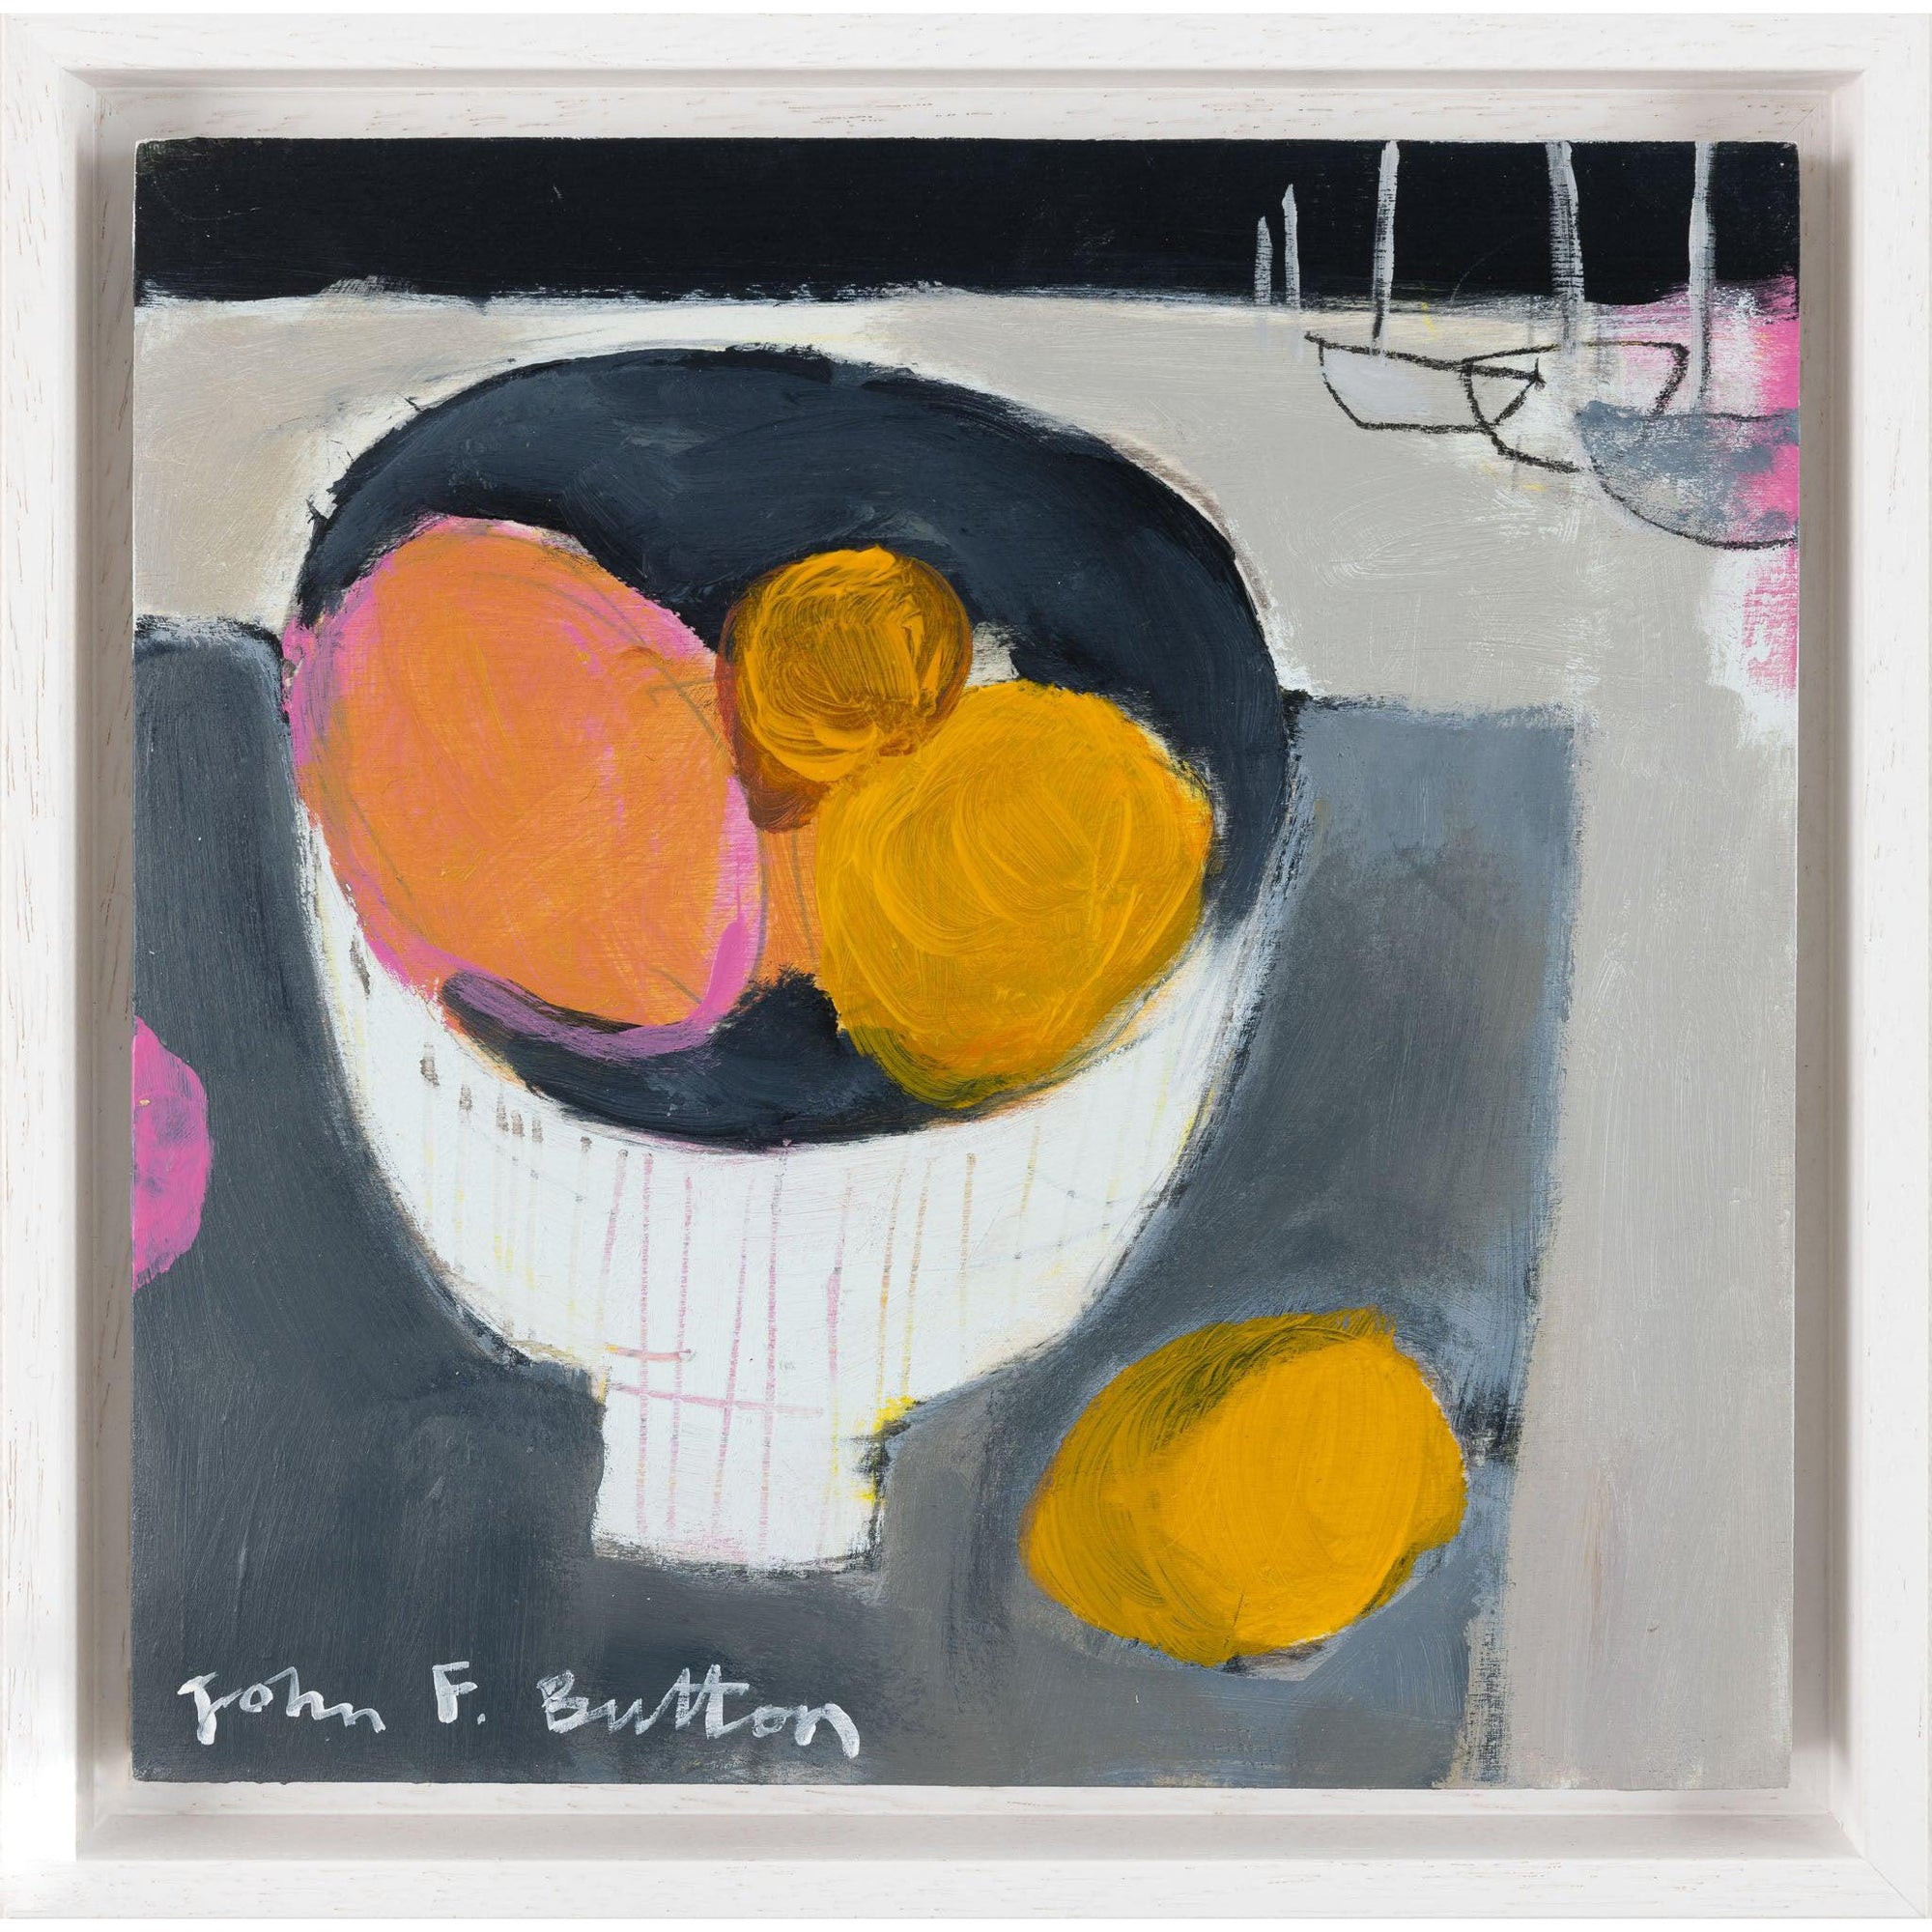 Fruitful by John Button available at Padstow Gallery, Cornwall